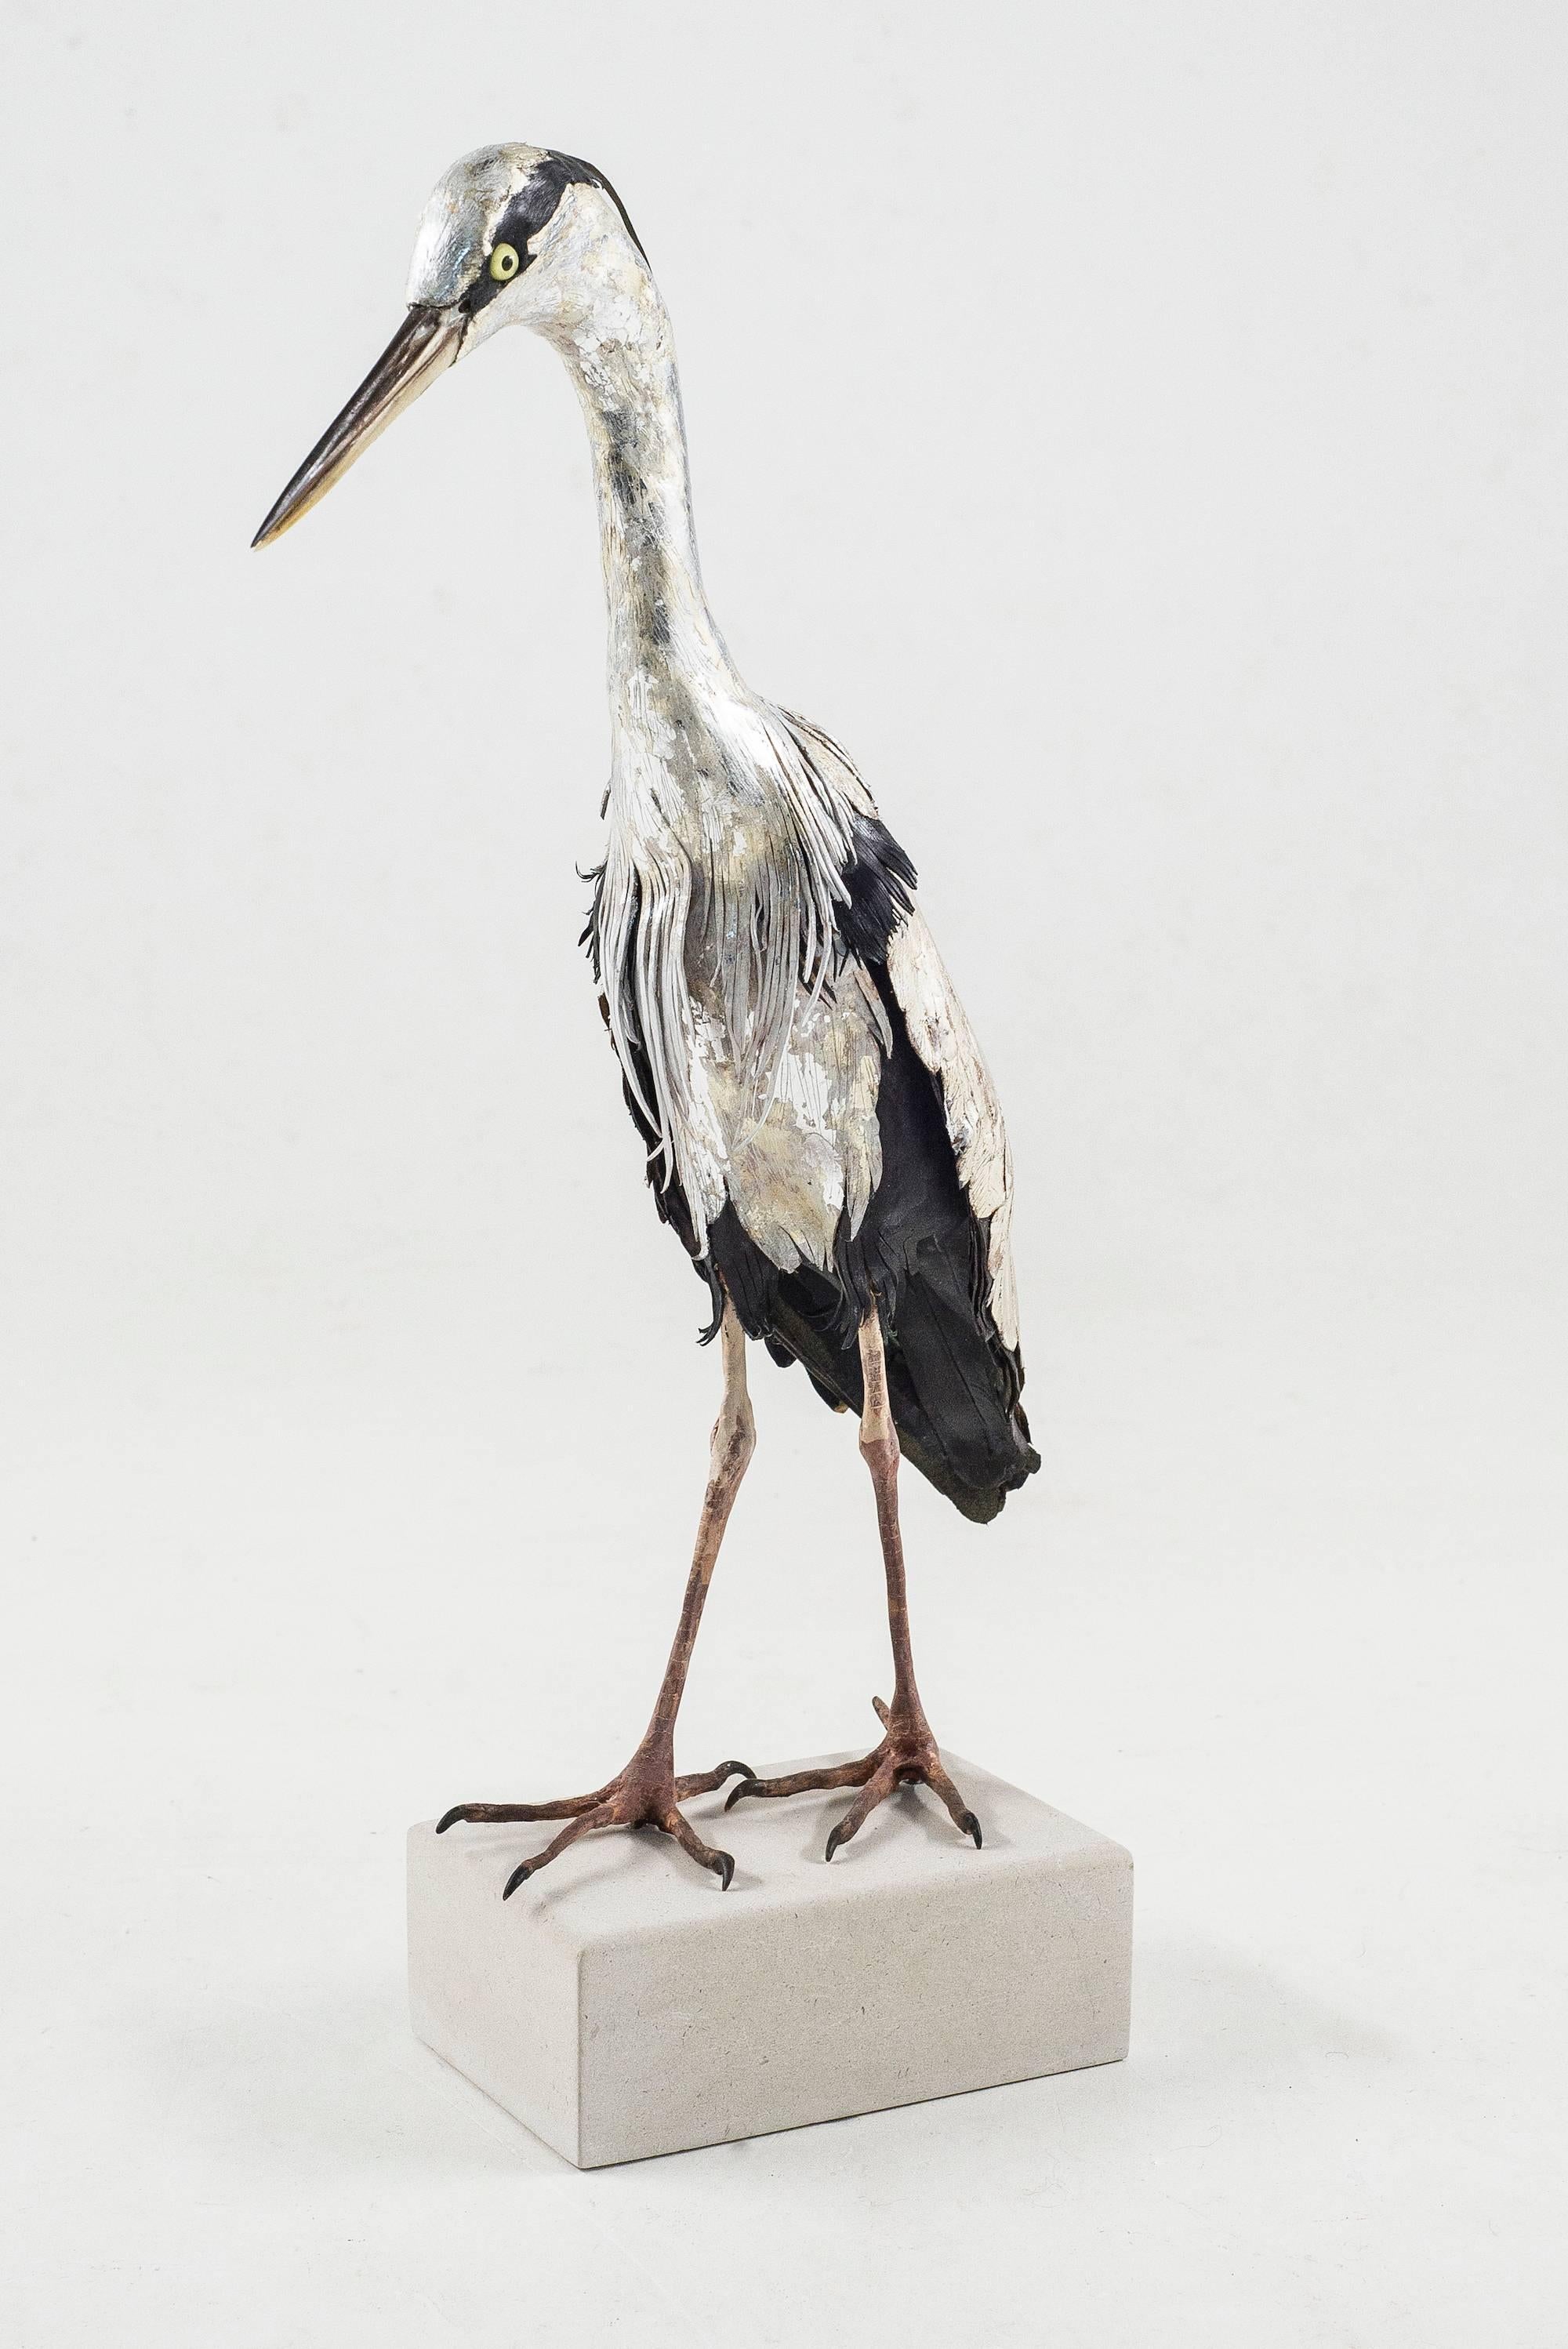 Georgina Brett-Chinnery Still-Life Sculpture - Self-Reliance 2 - LIFE SIZE heron sculpture made of leather and clay